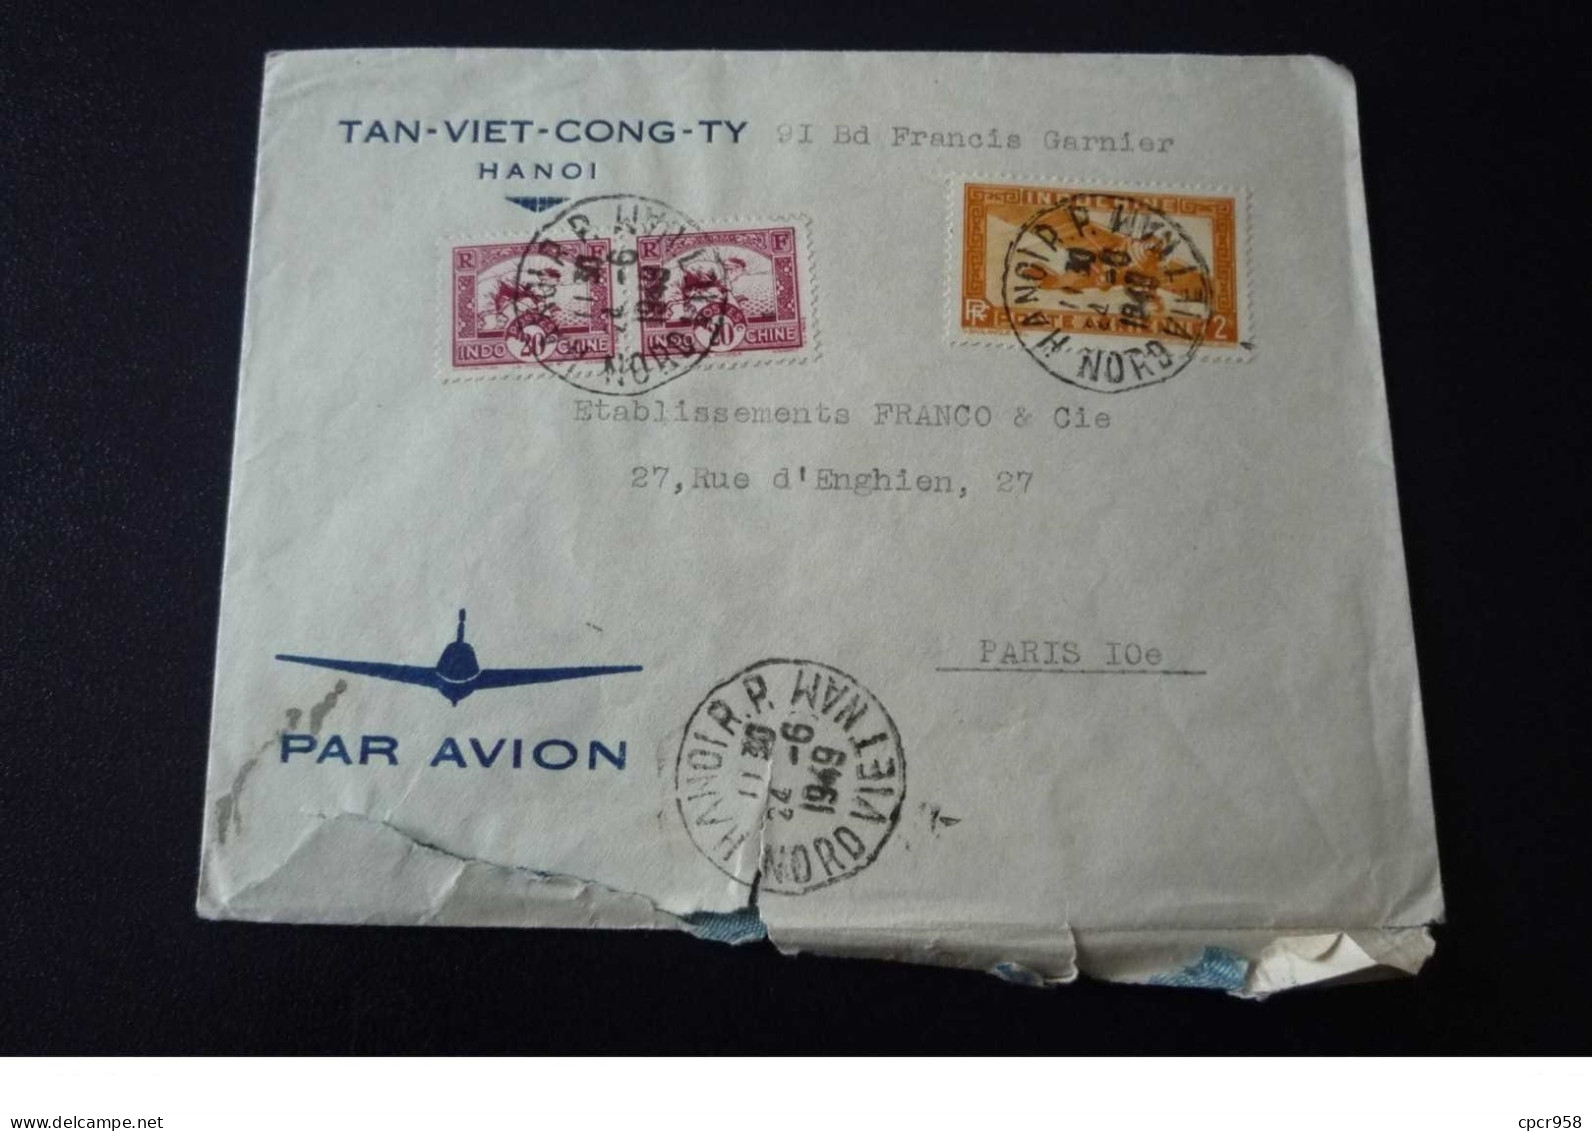 Indochine.viet-nam. N°150033 .hanoi/ Marseille Poste Aerienne .1949.timbres .cachet .obliterations Mixtes. - Covers & Documents